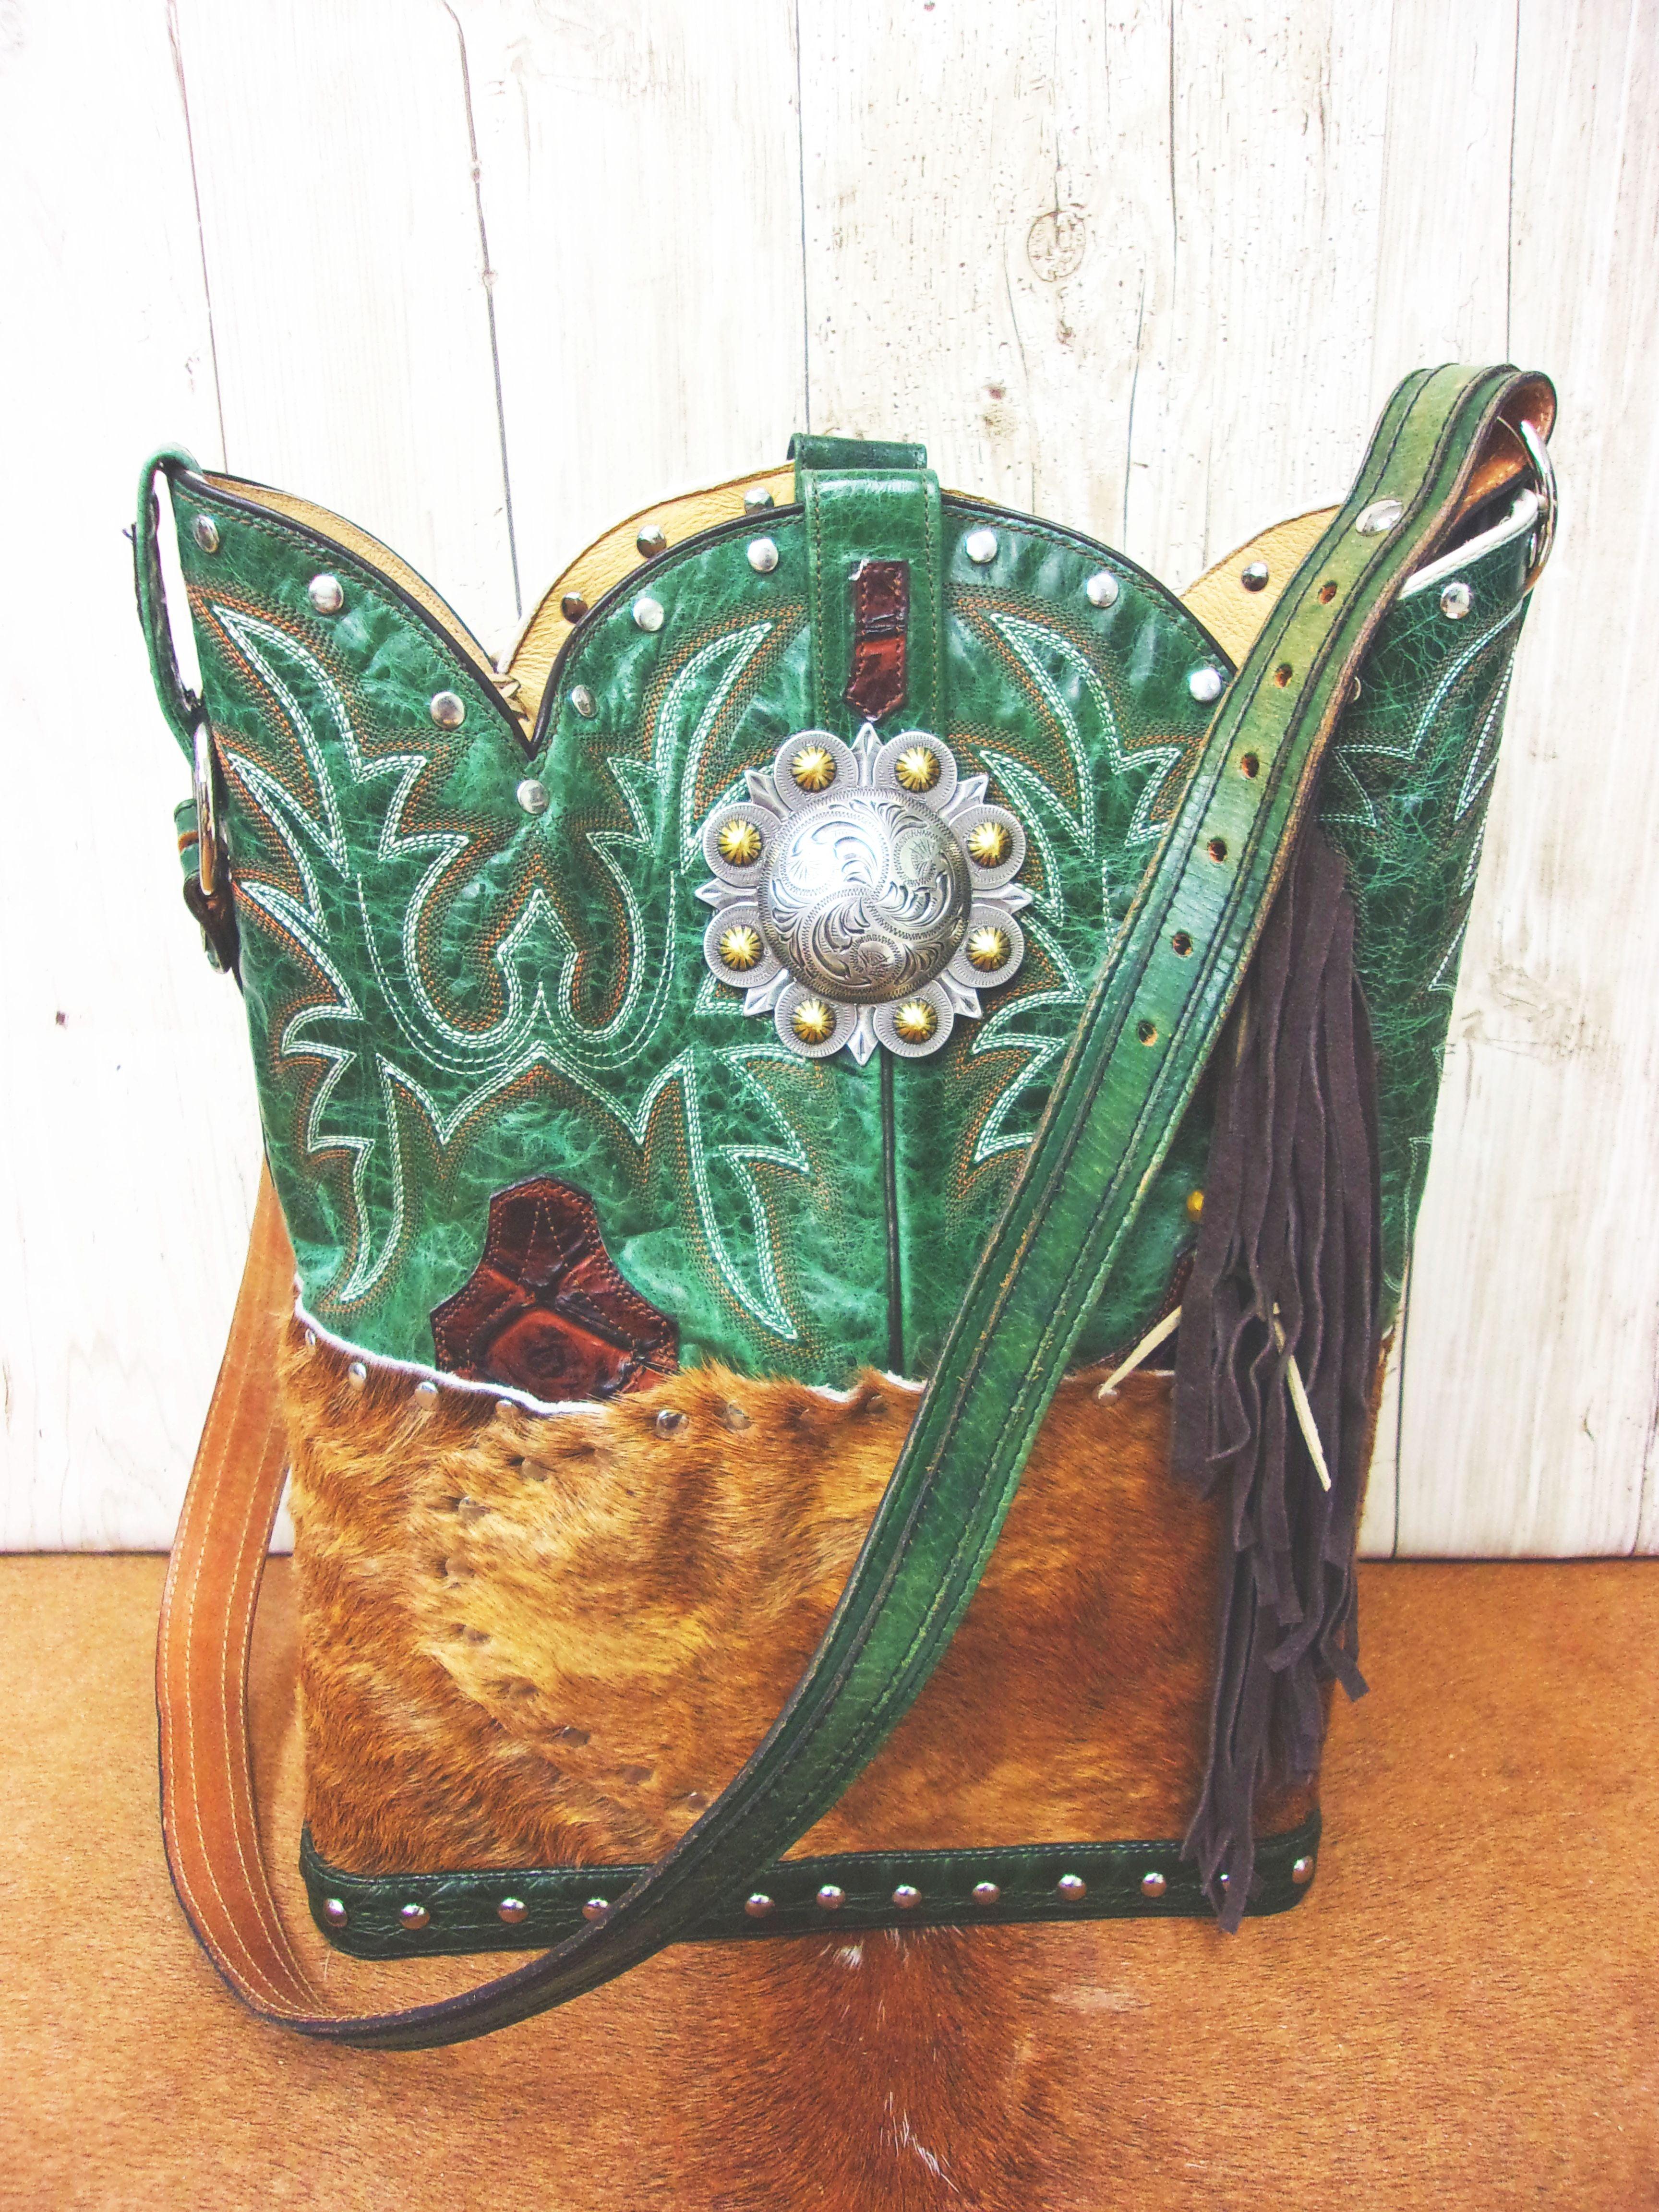 Leather Purse with Fringe - Cowboy Boot Purse with Fringe - Western Shoulder Bag with Fringe TS309 cowboy boot purses, western fringe purse, handmade leather purses, boot purse, handmade western purse, custom leather handbags Chris Thompson Bags